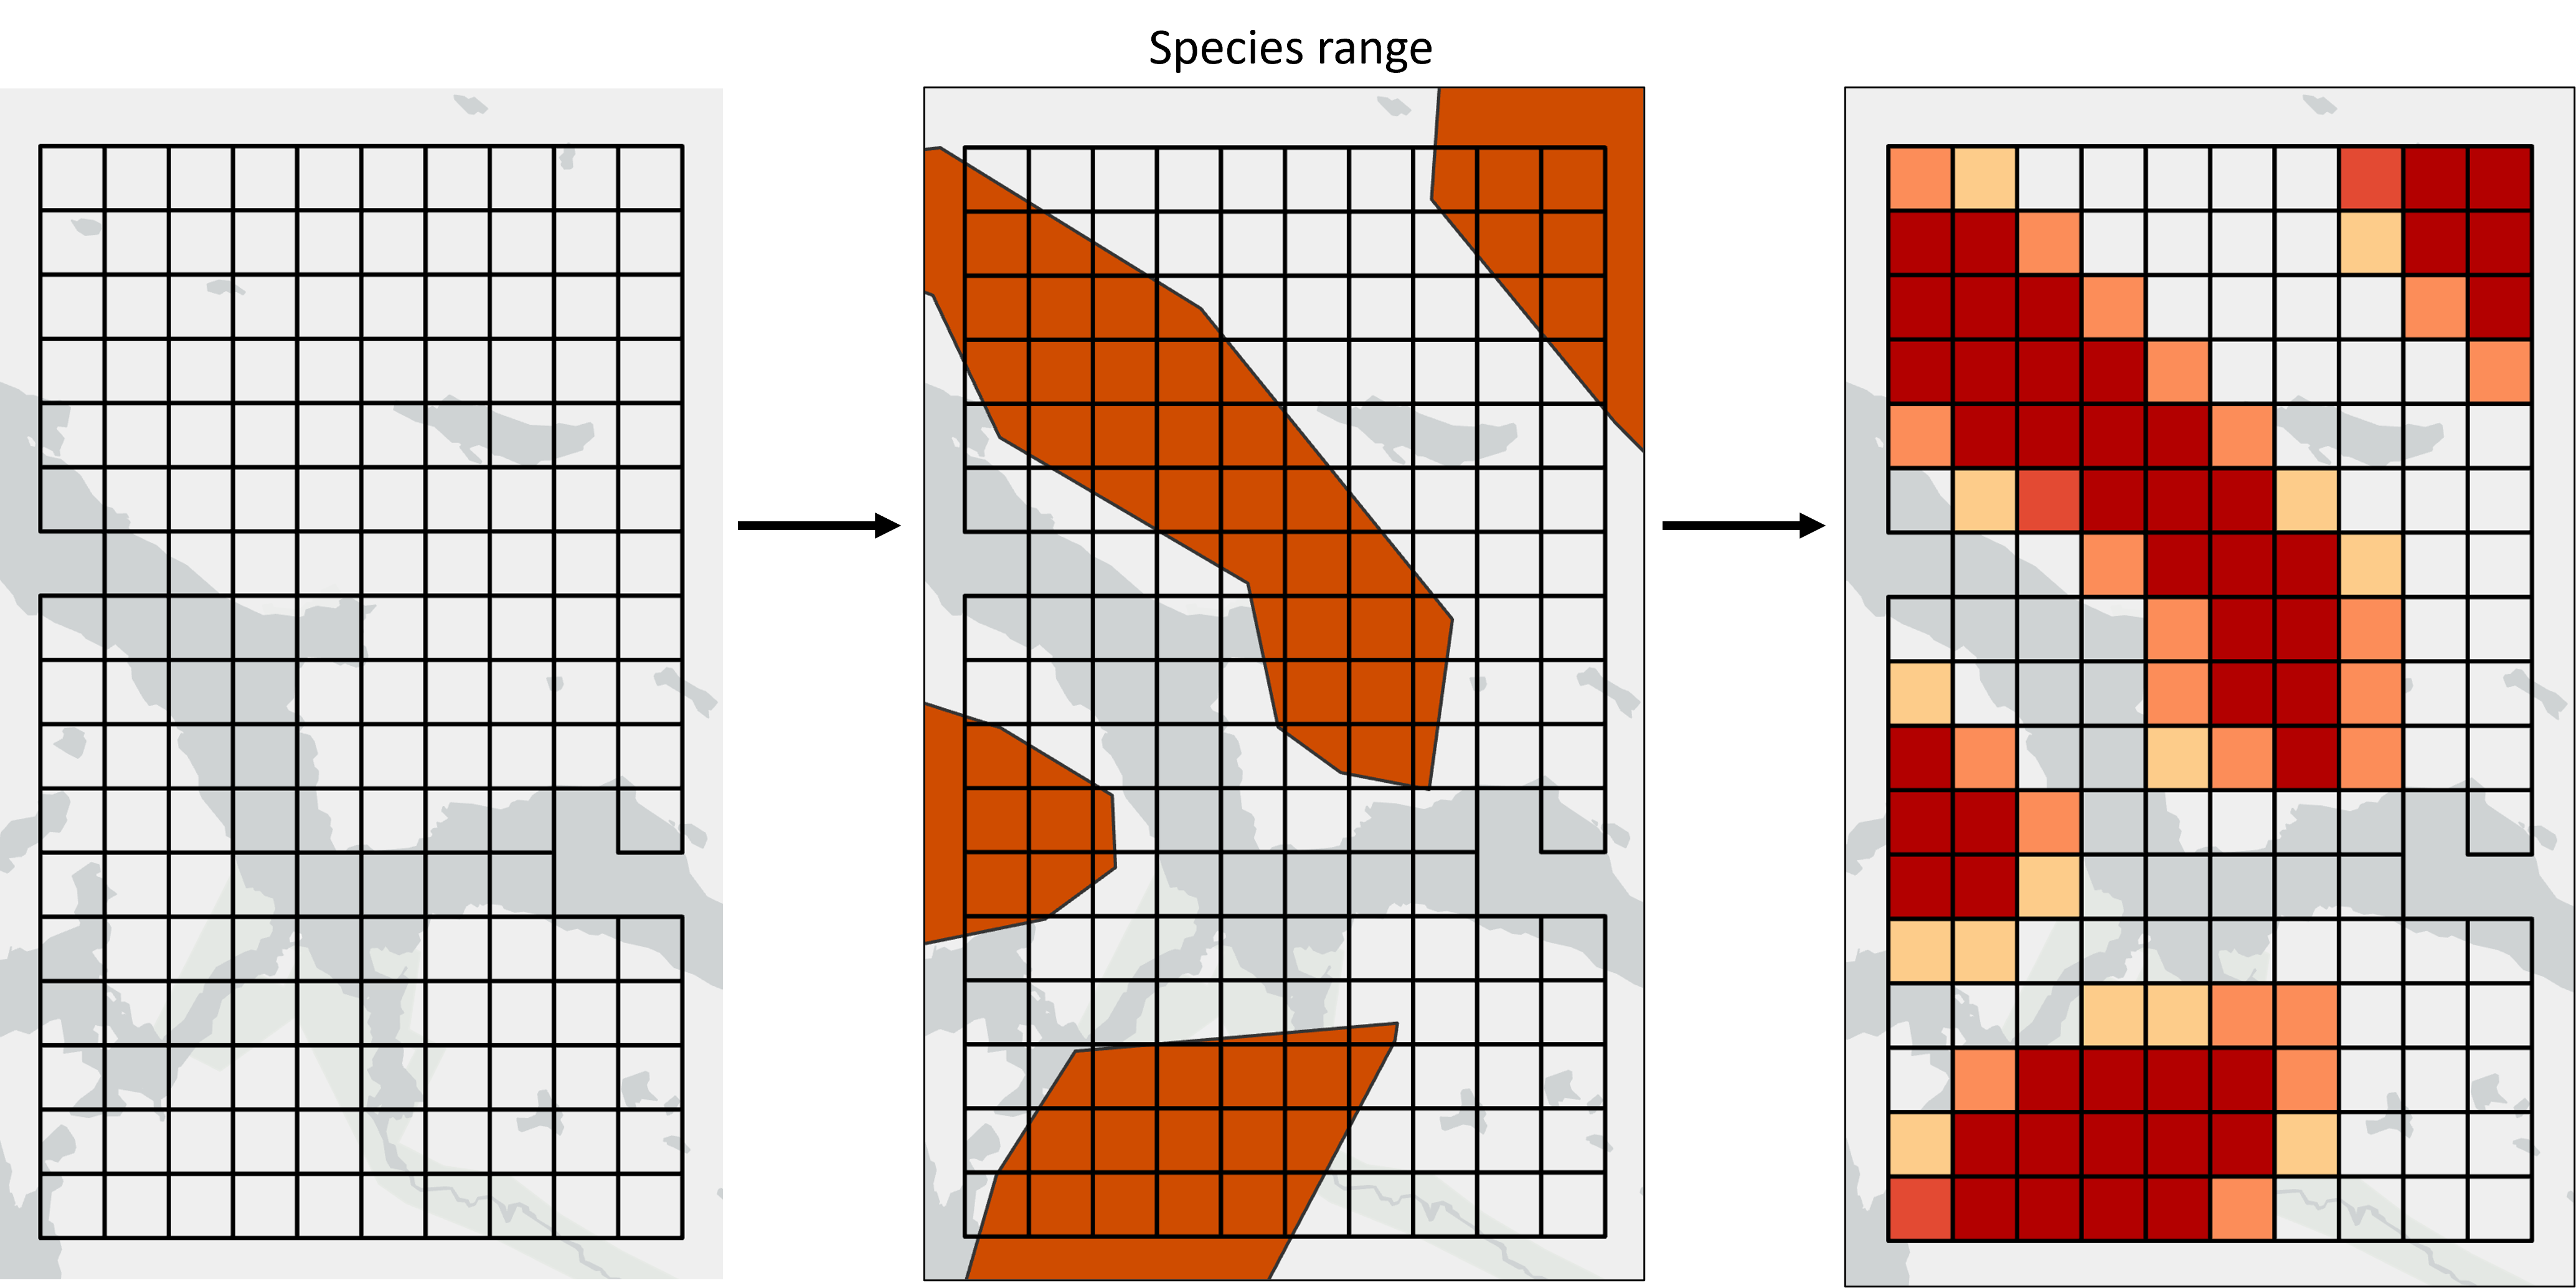 *Fig 1. Species ranges representing areas of presence/absence are converted into plannnig unit values representing the area of each planning unit covered by the species range.*